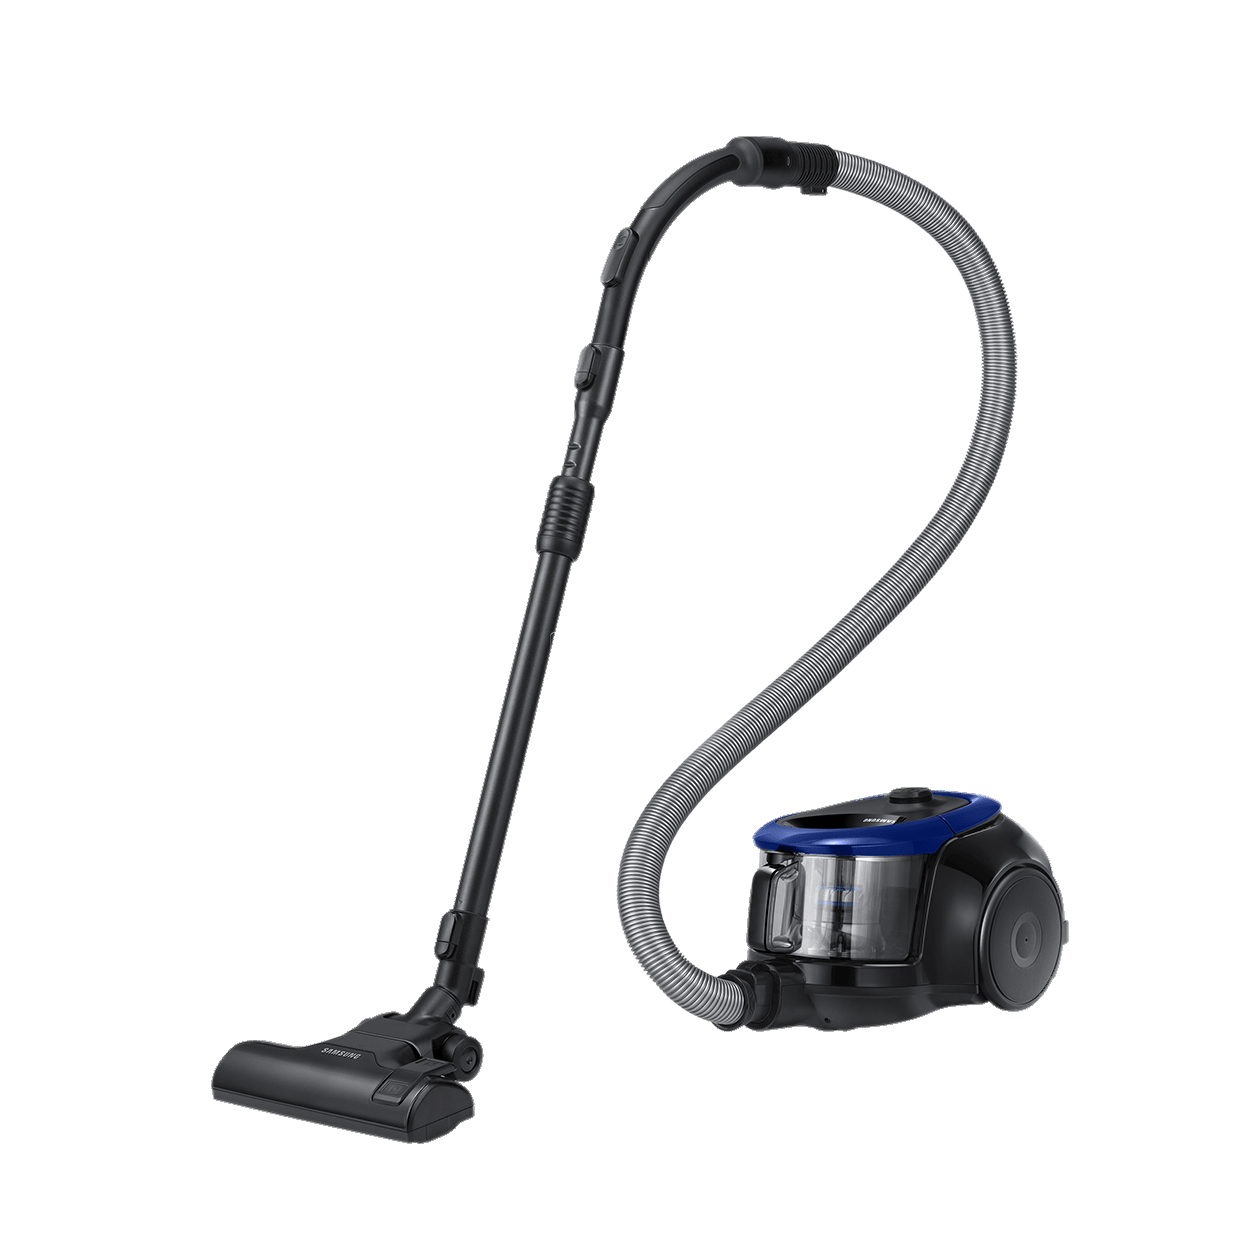 Vacuum Cleaner PNG Image in High Definition